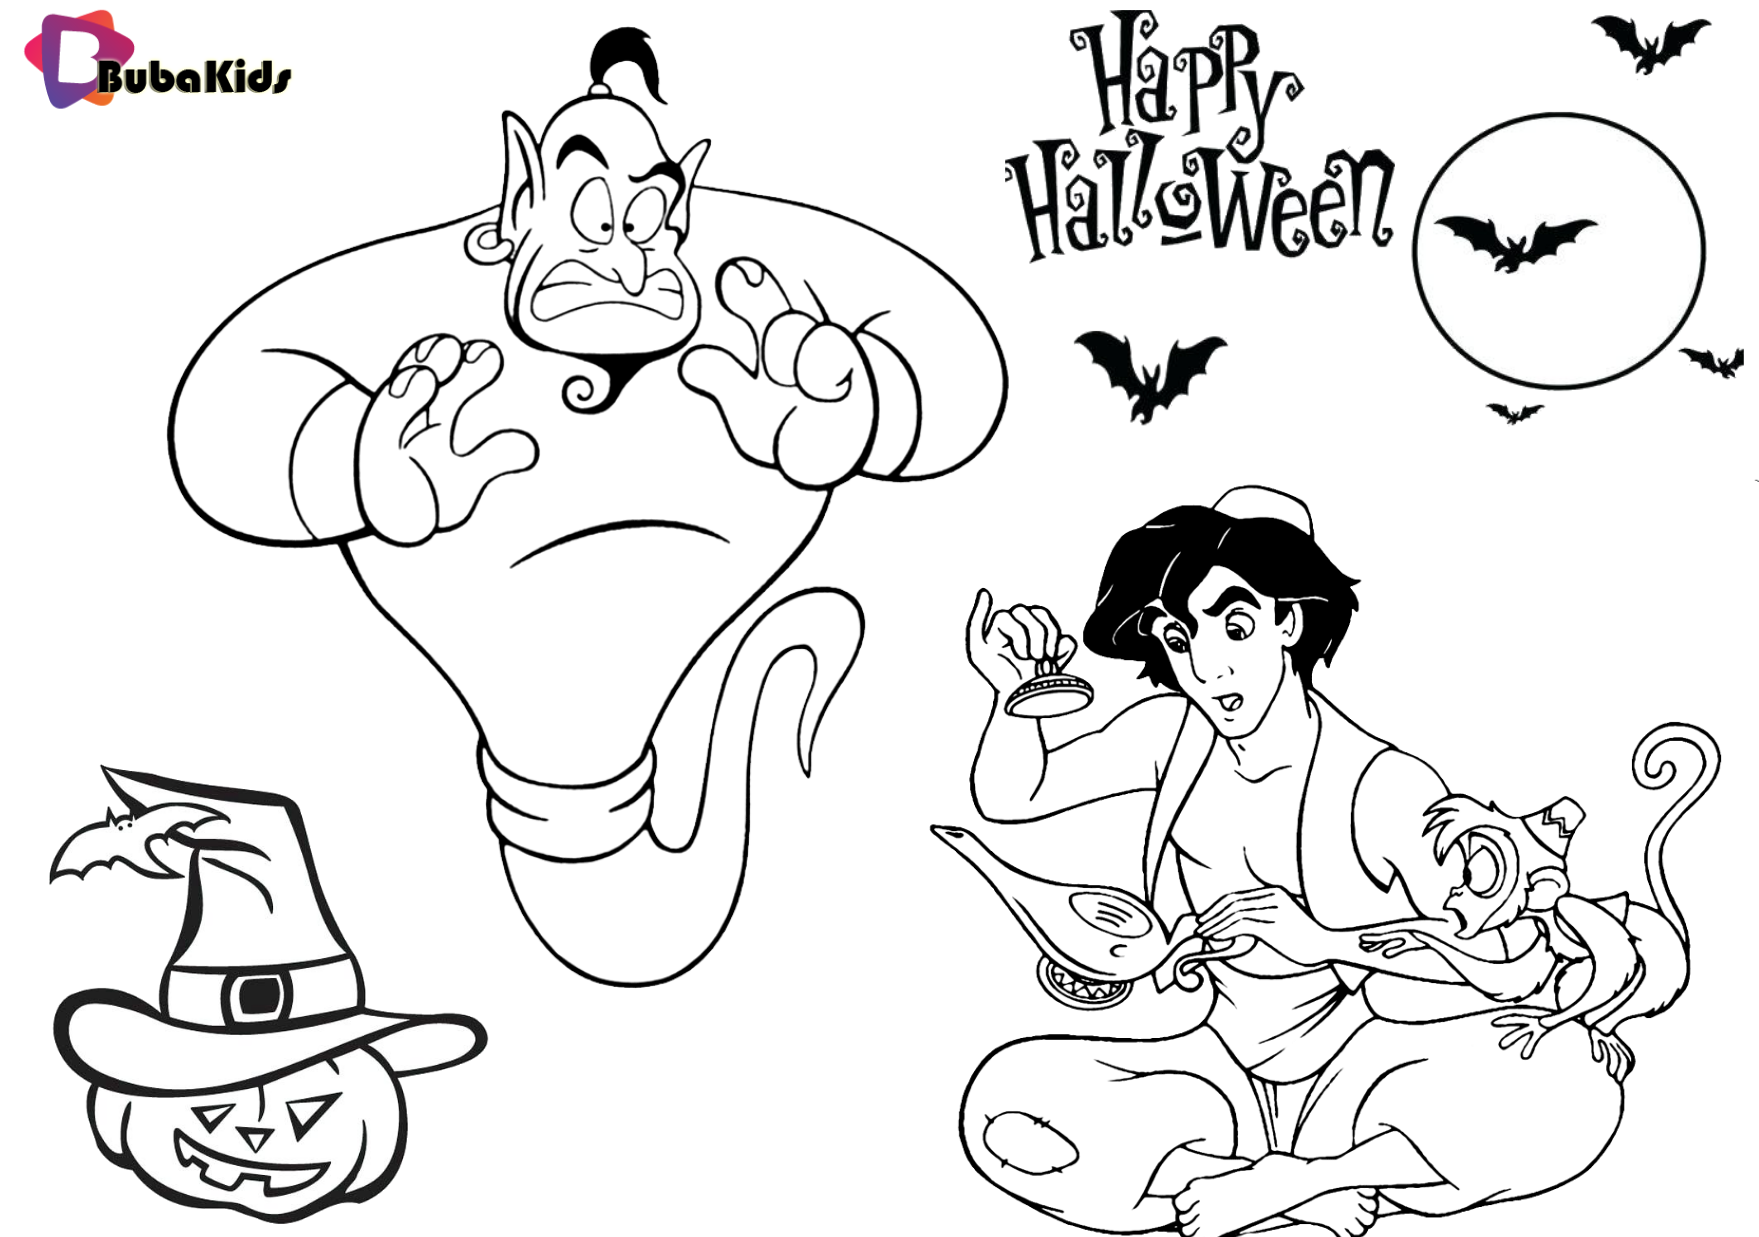 Aladdin, genie and abu Halloween 2019 costume ideas coloring page. Wallpaper